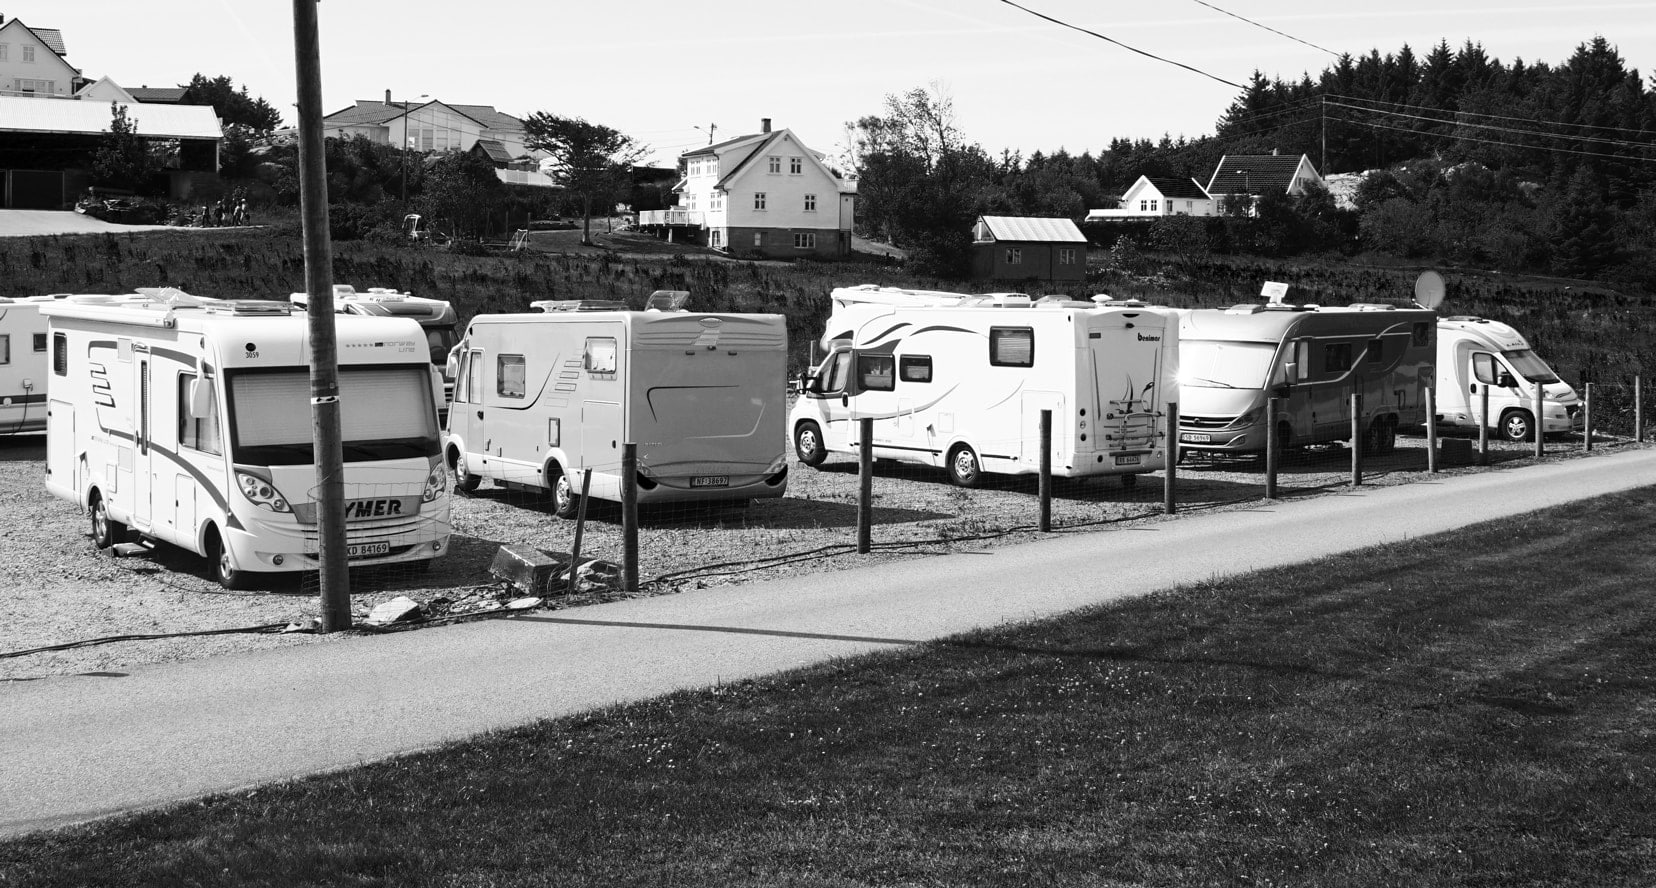 row of motorhomes at a campsite